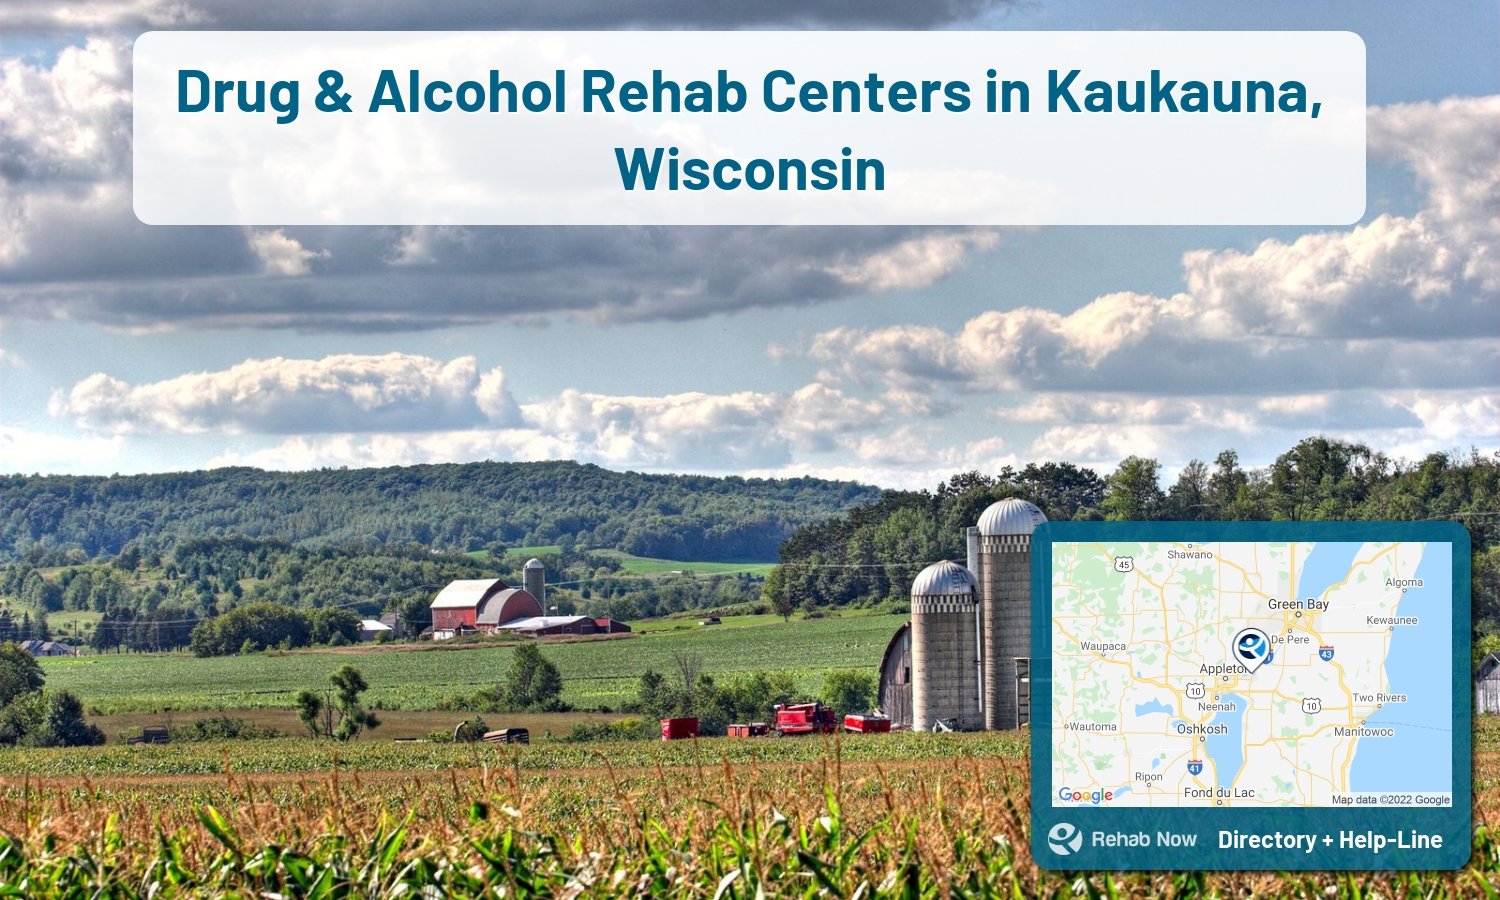 Need treatment nearby in Kaukauna, Wisconsin? Choose a drug/alcohol rehab center from our list, or call our hotline now for free help.